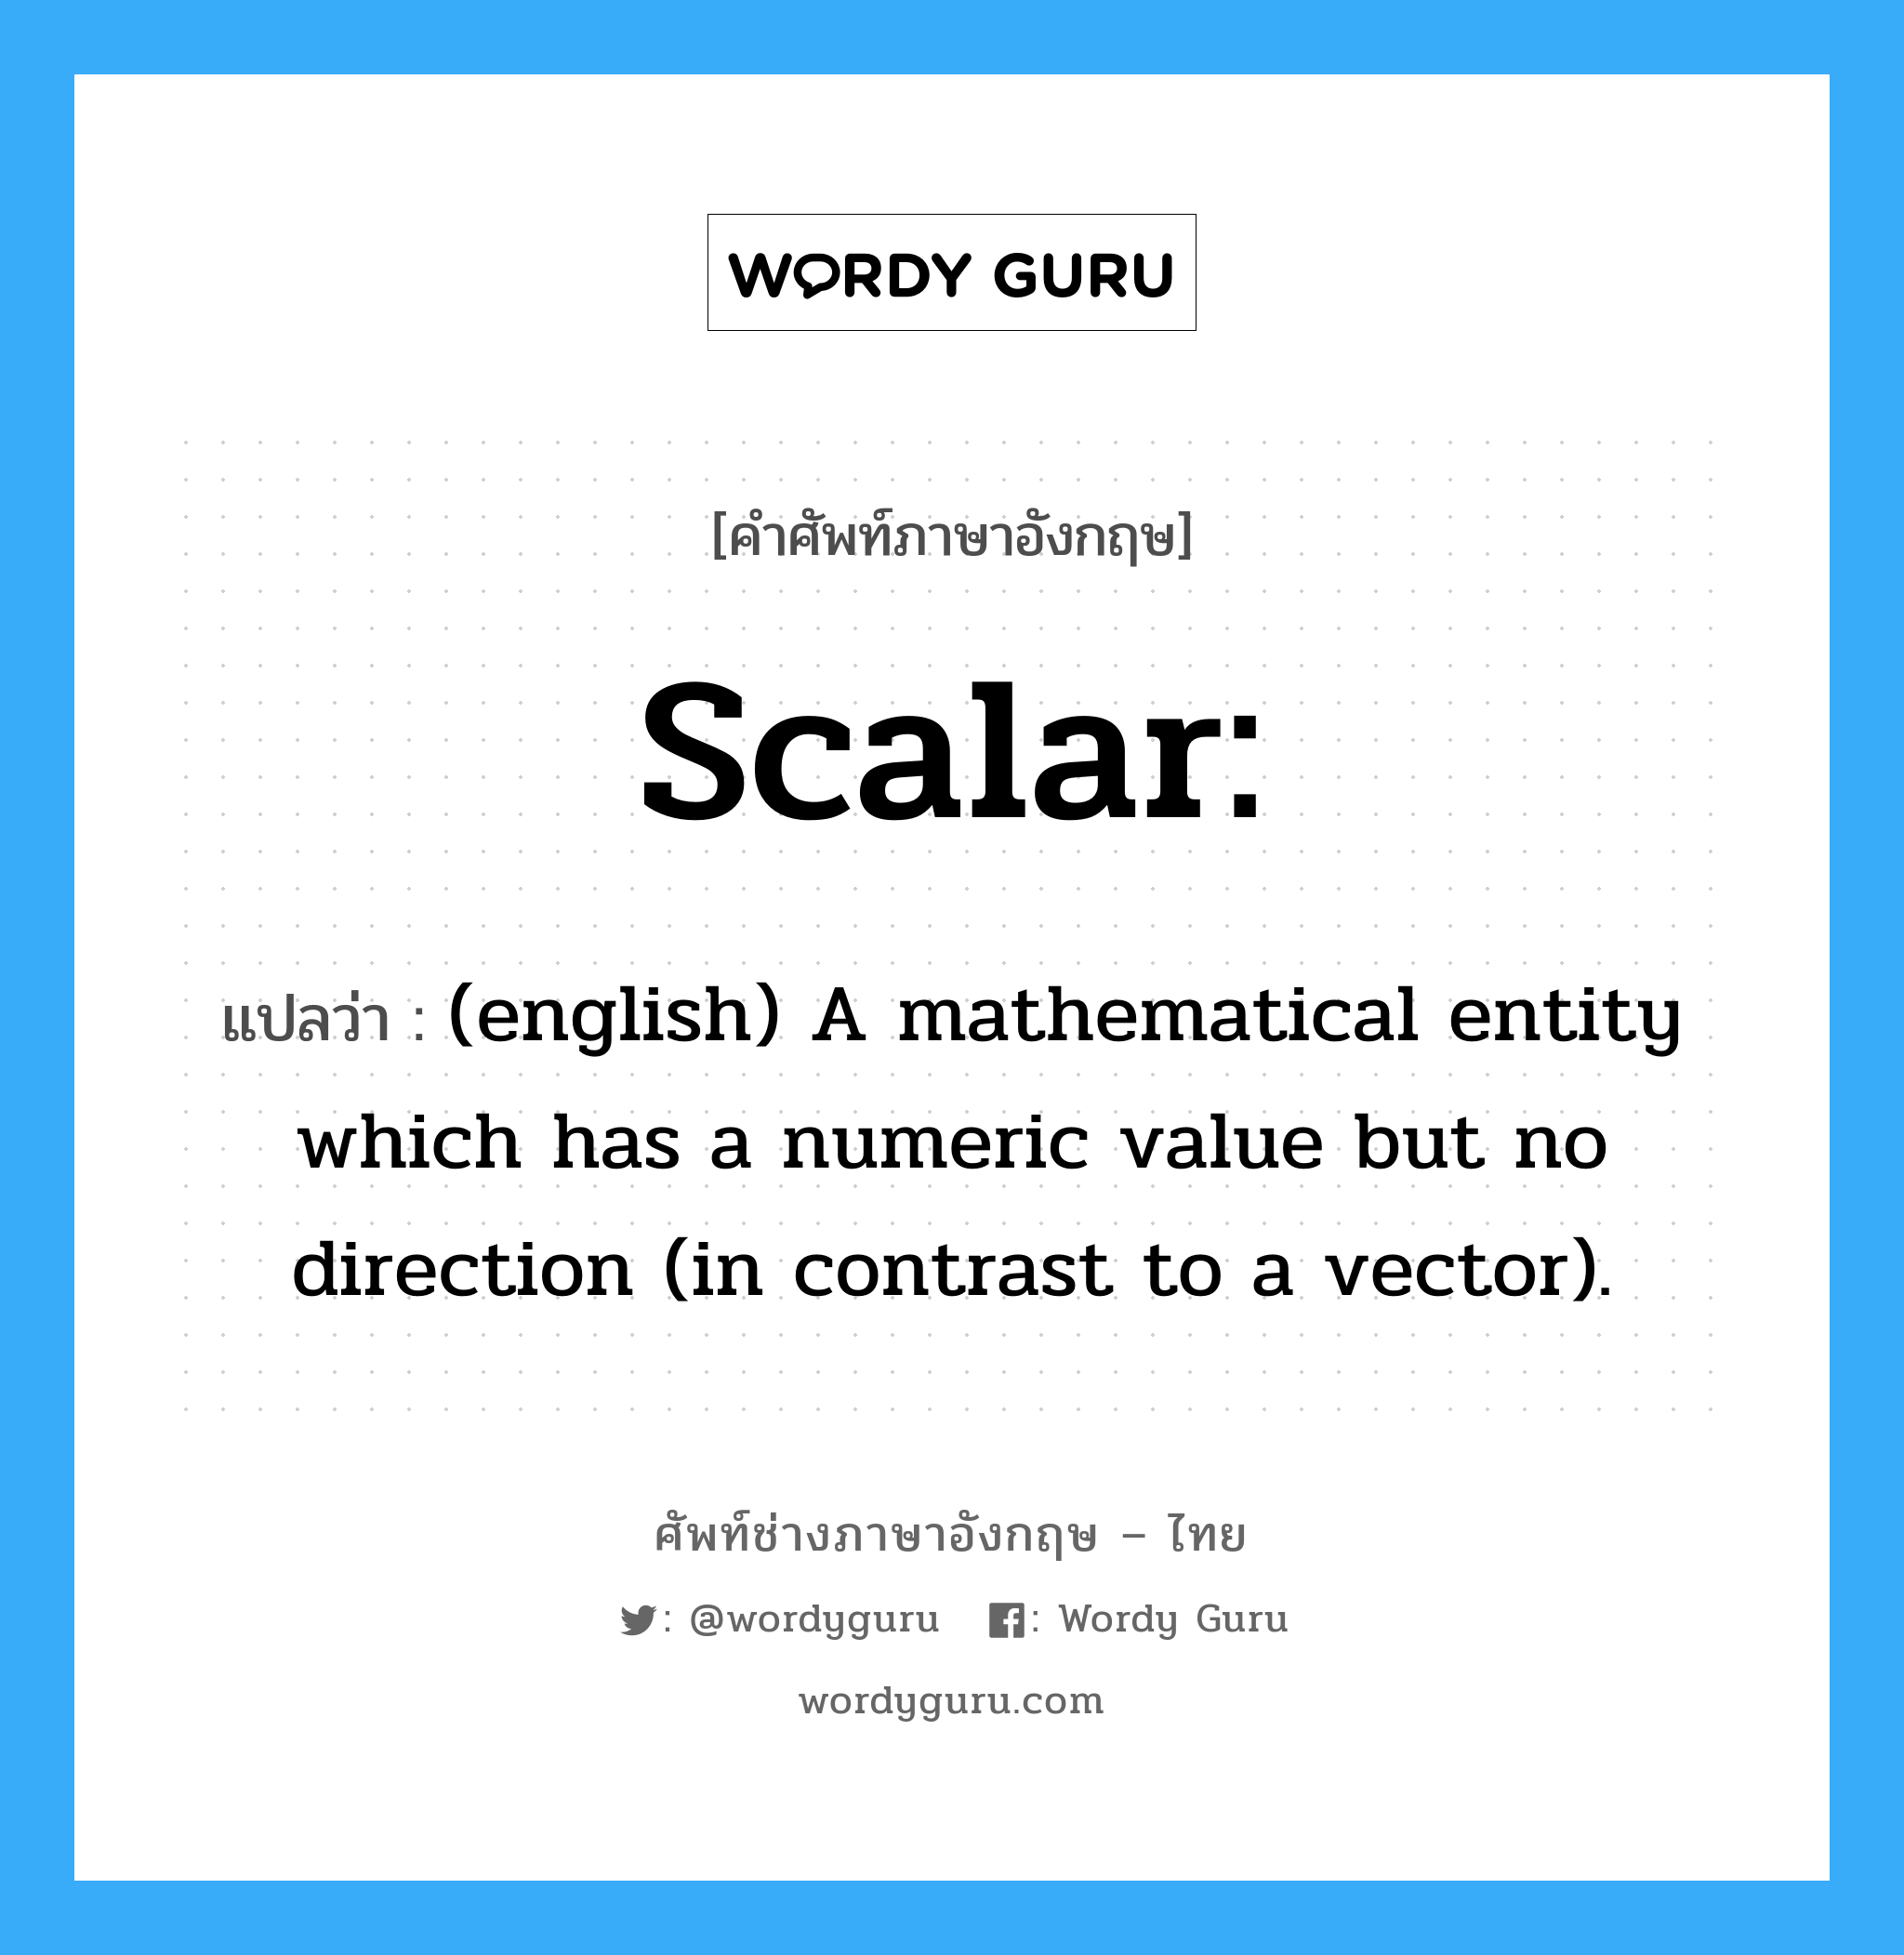 Scalar: แปลว่า?, คำศัพท์ช่างภาษาอังกฤษ - ไทย Scalar: คำศัพท์ภาษาอังกฤษ Scalar: แปลว่า (english) A mathematical entity which has a numeric value but no direction (in contrast to a vector).